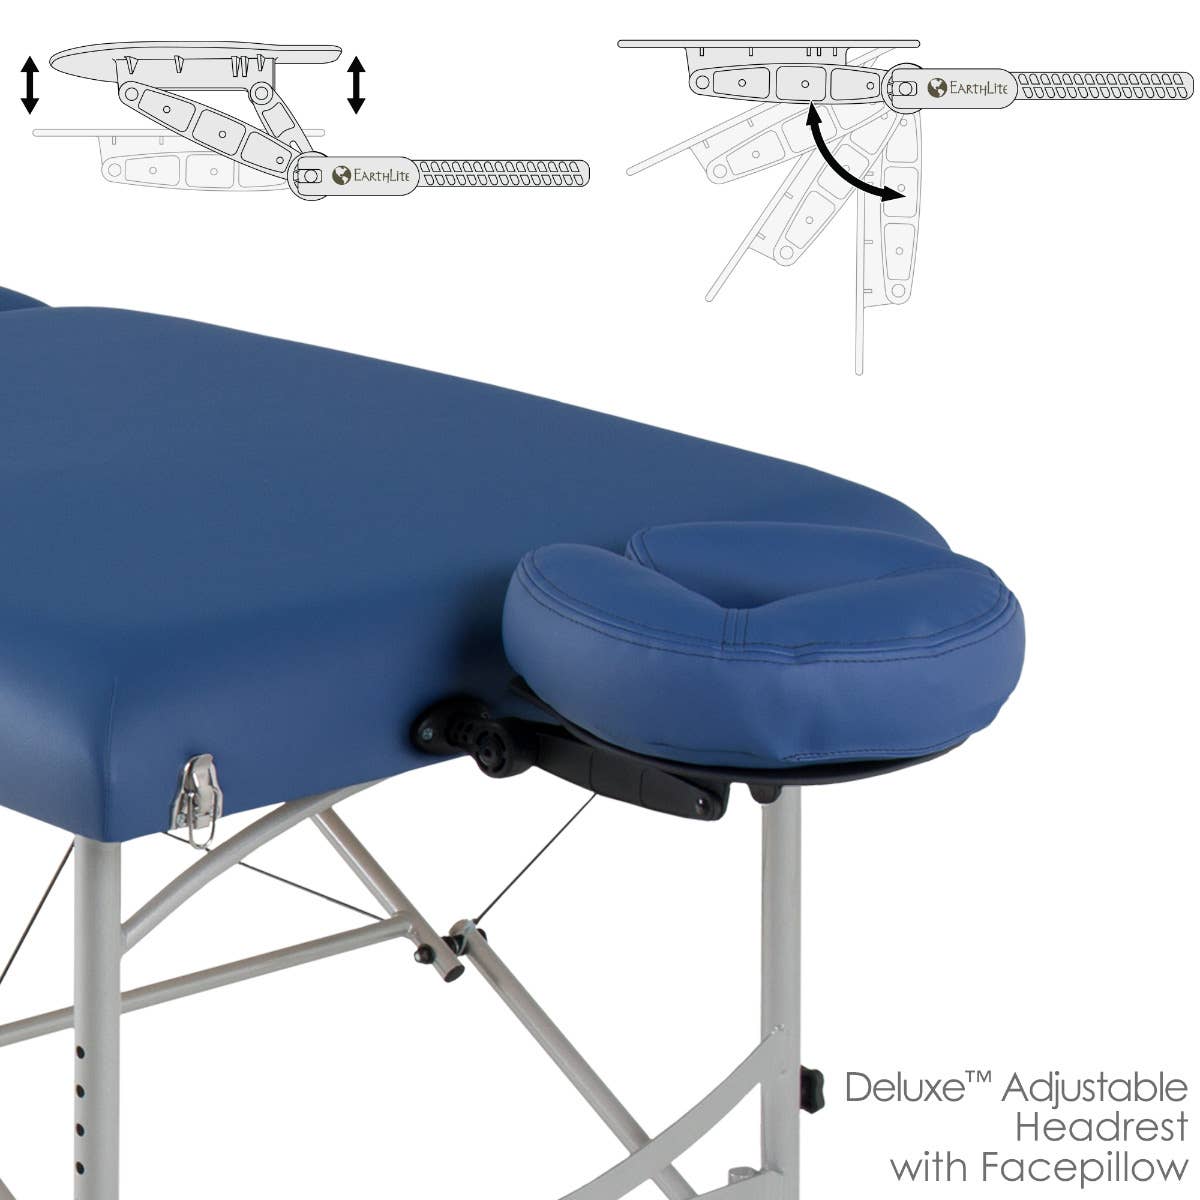 Stronglite Versalite Pro table adjustable headrest platform and face pillow cushion in Royal Blue color. 